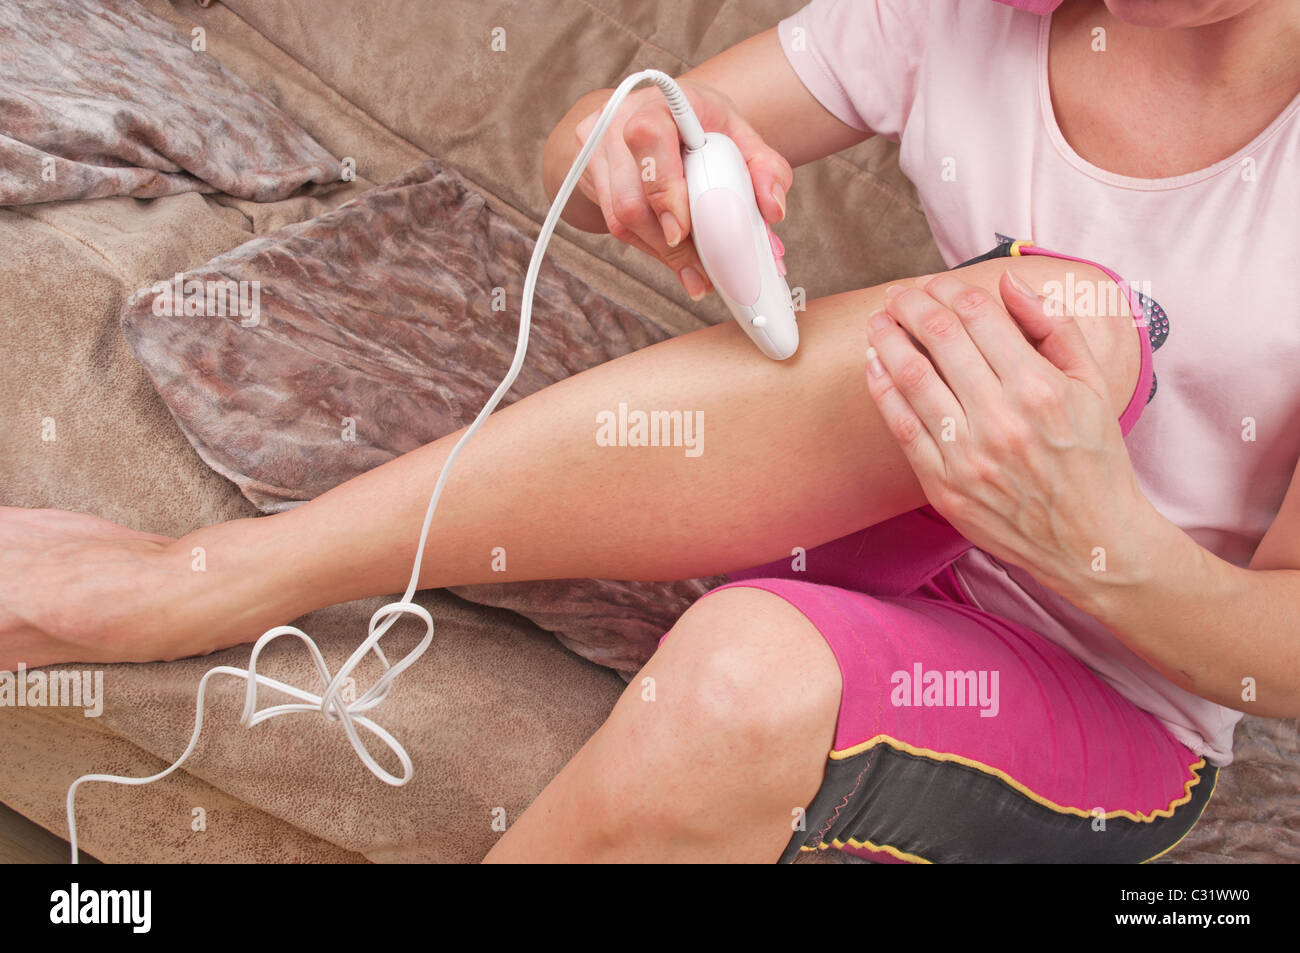 Epilation process in a Houses on sofa Stock Photo